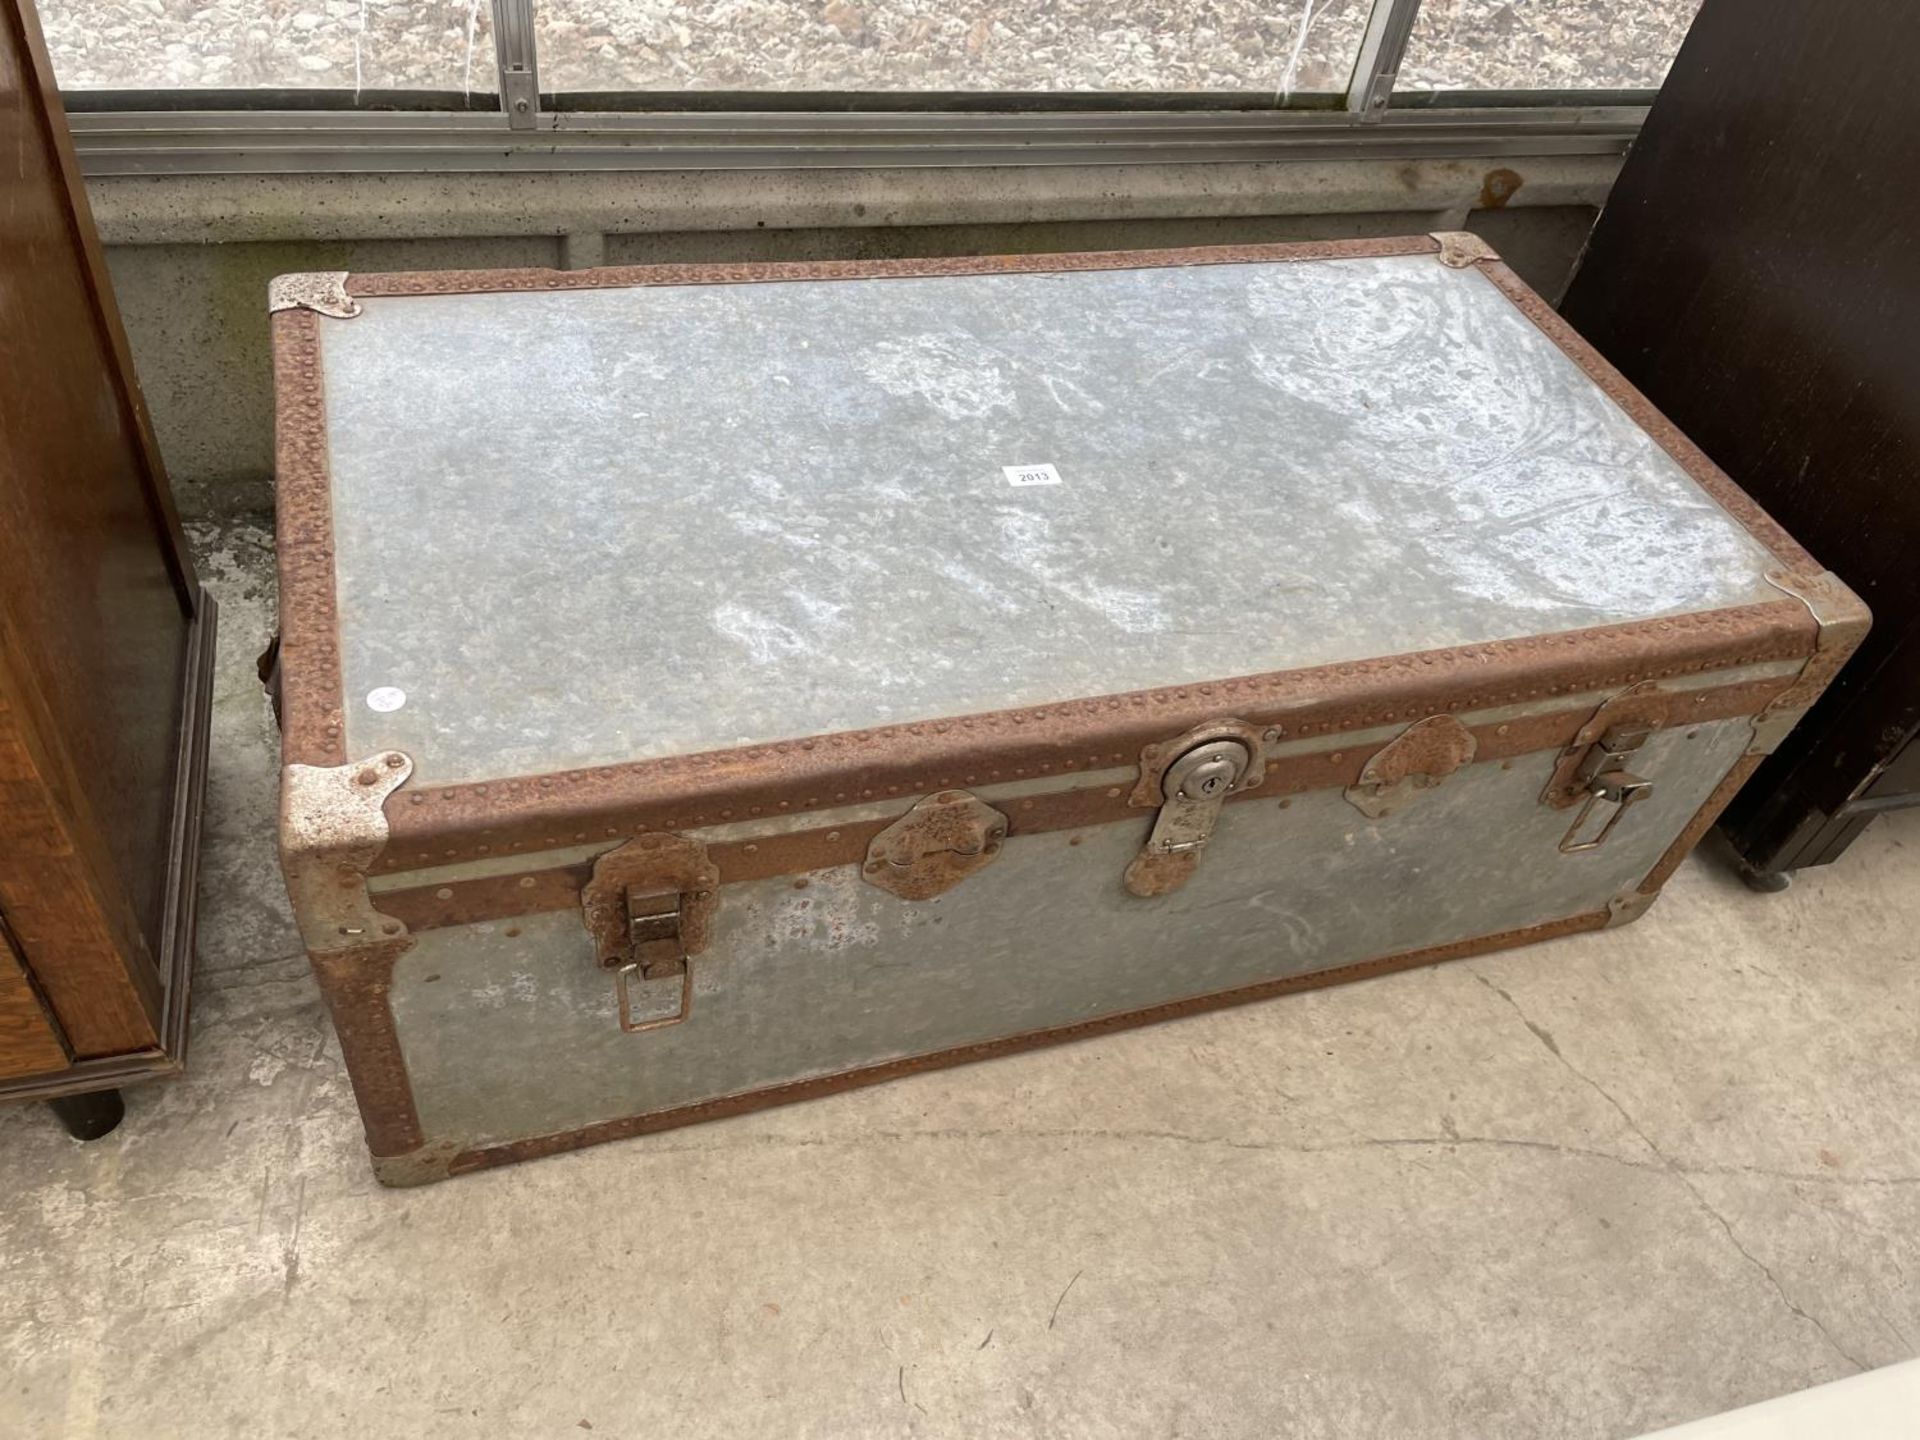 A SUBSTANTIAL GALVANISED METAL TRAVELLING TRUNK, 40X21"